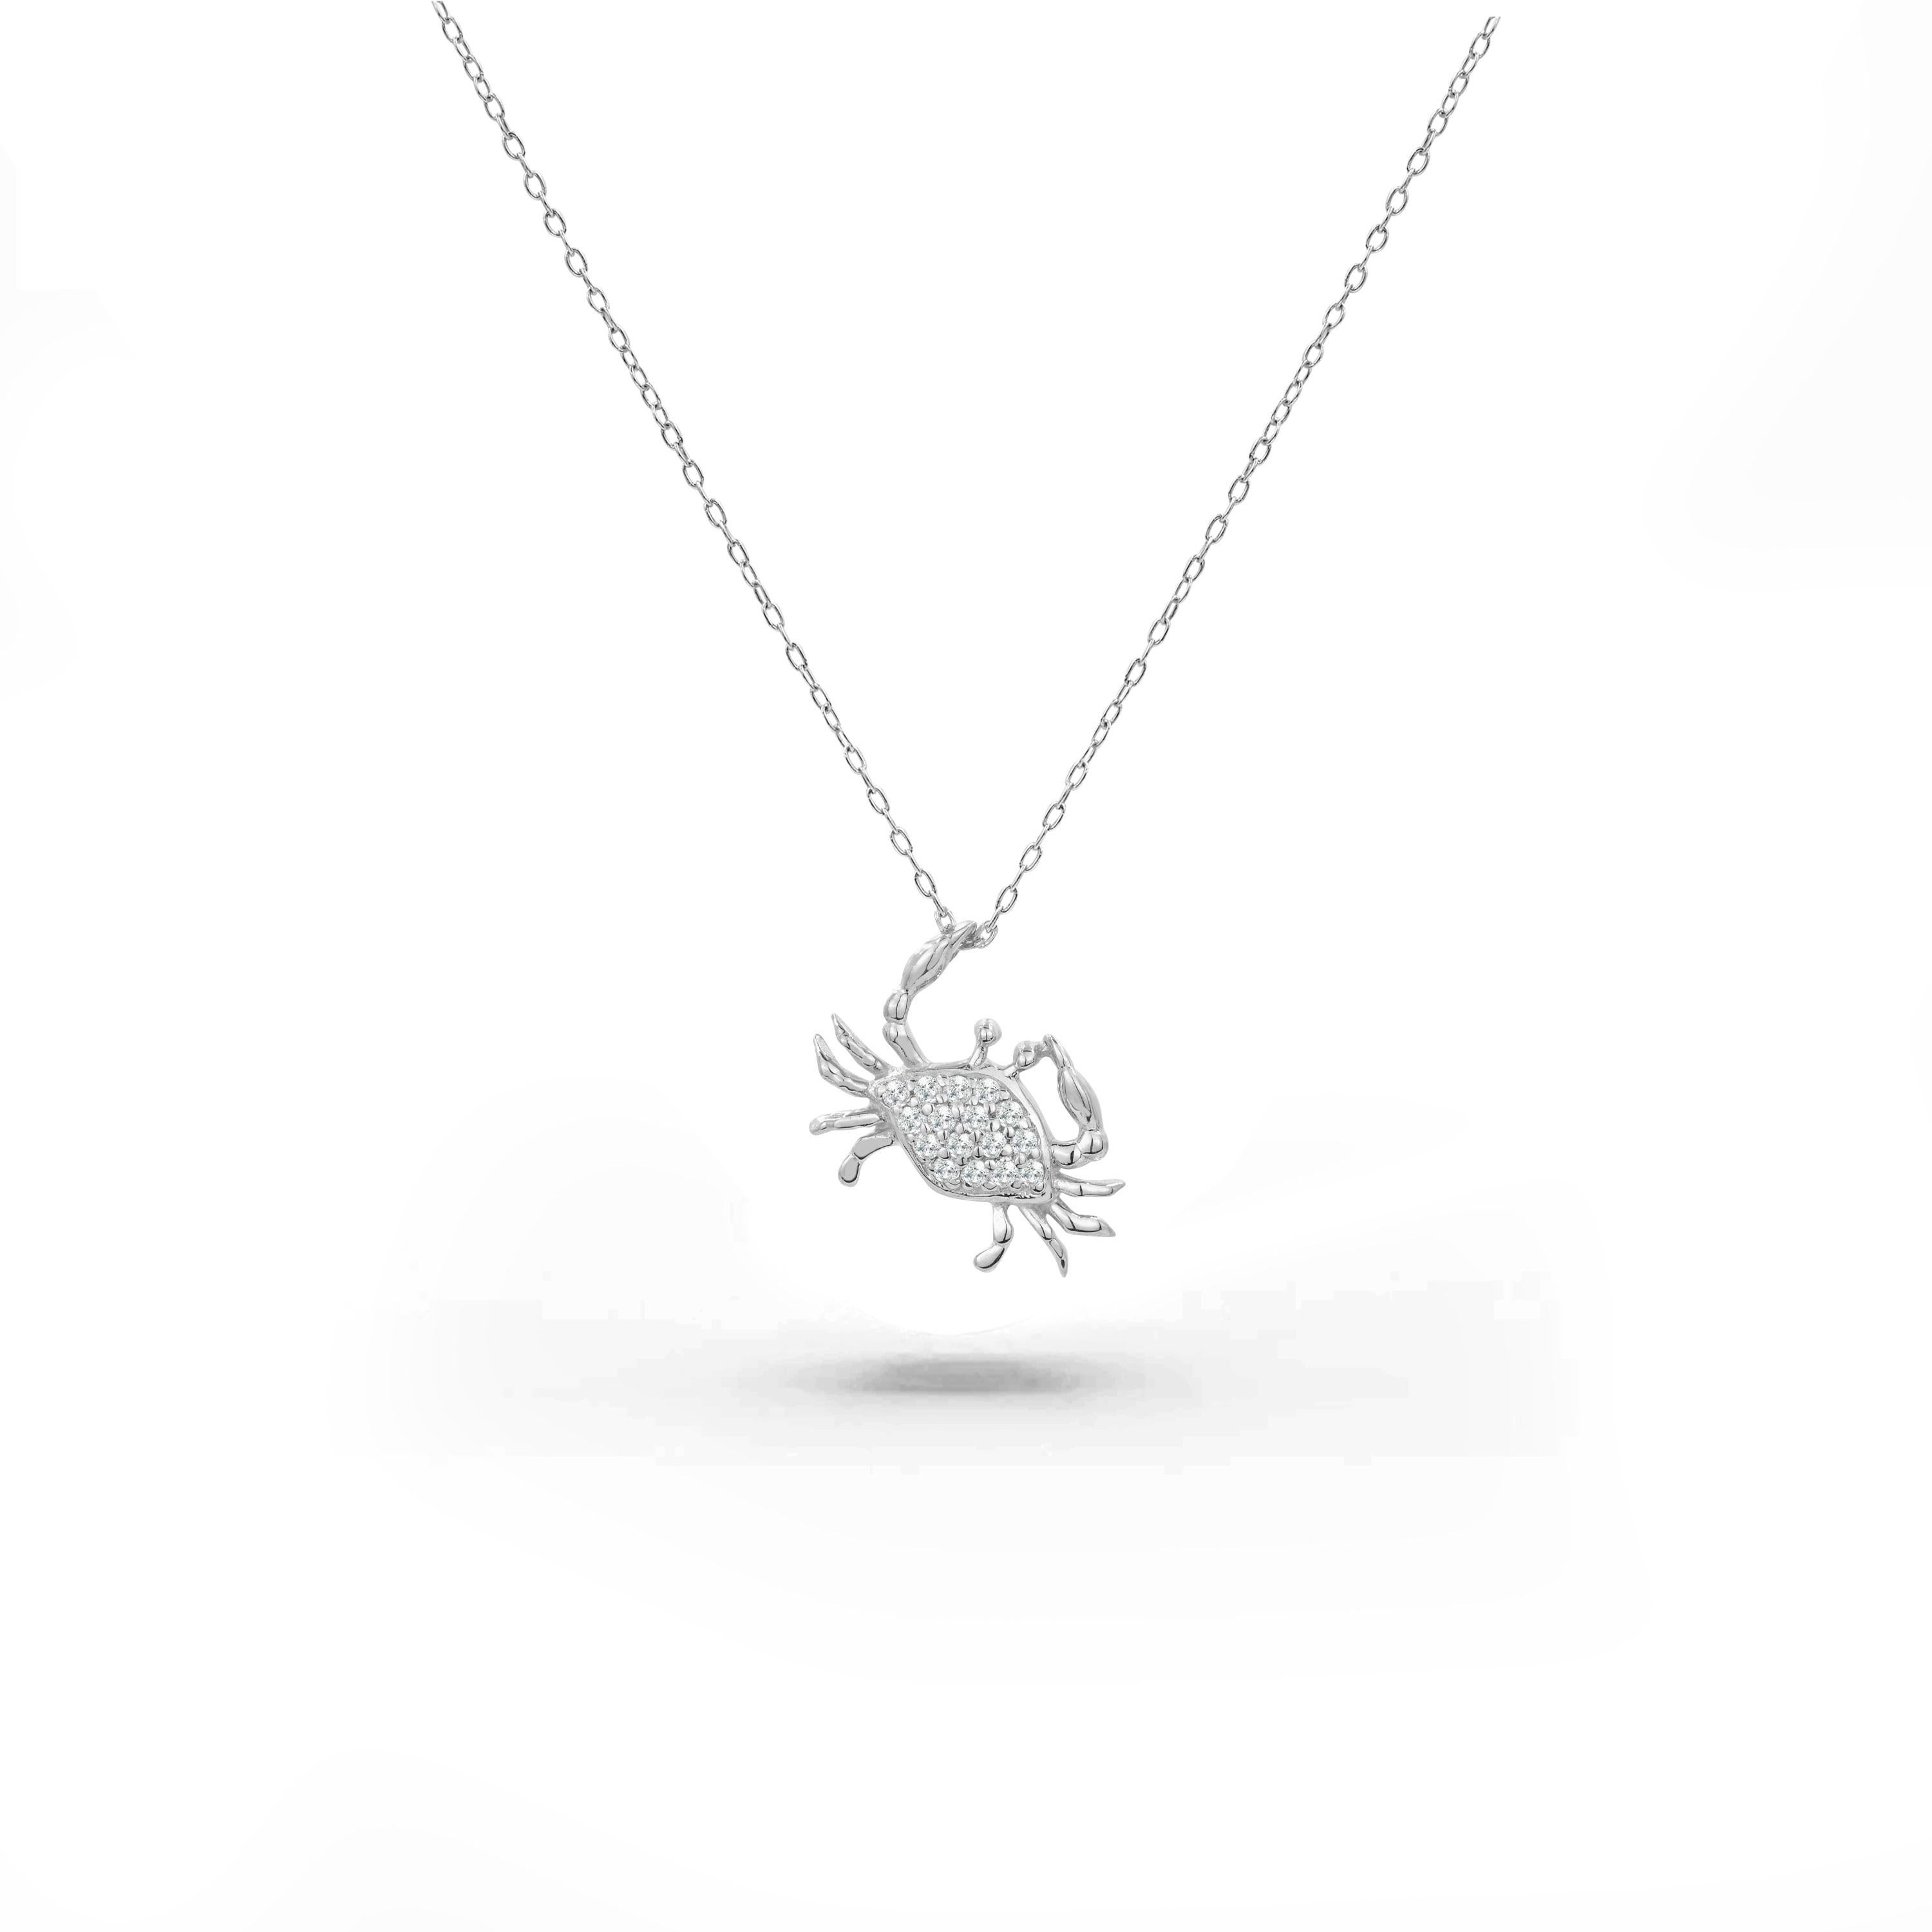 crab necklace meaning